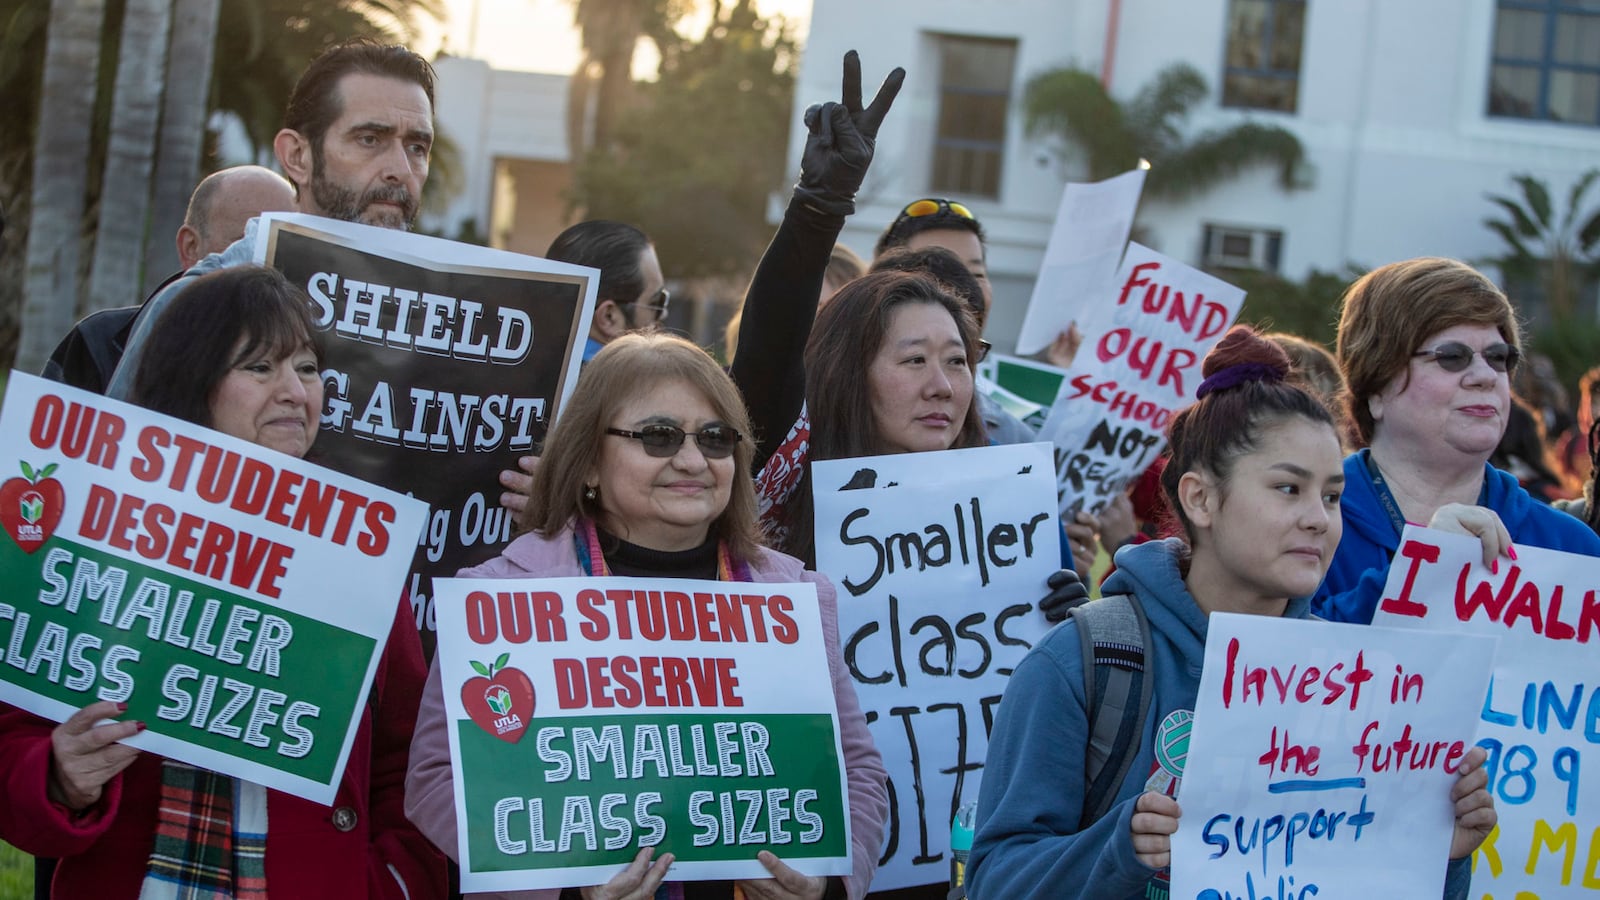 Teachers, retired teachers and parents show their support for UTLA in front of Venice High School in Venice, Calif., on Jan. 10, 2019.  (Photo by Brian van der Brug/Los Angeles Times via Getty Images)